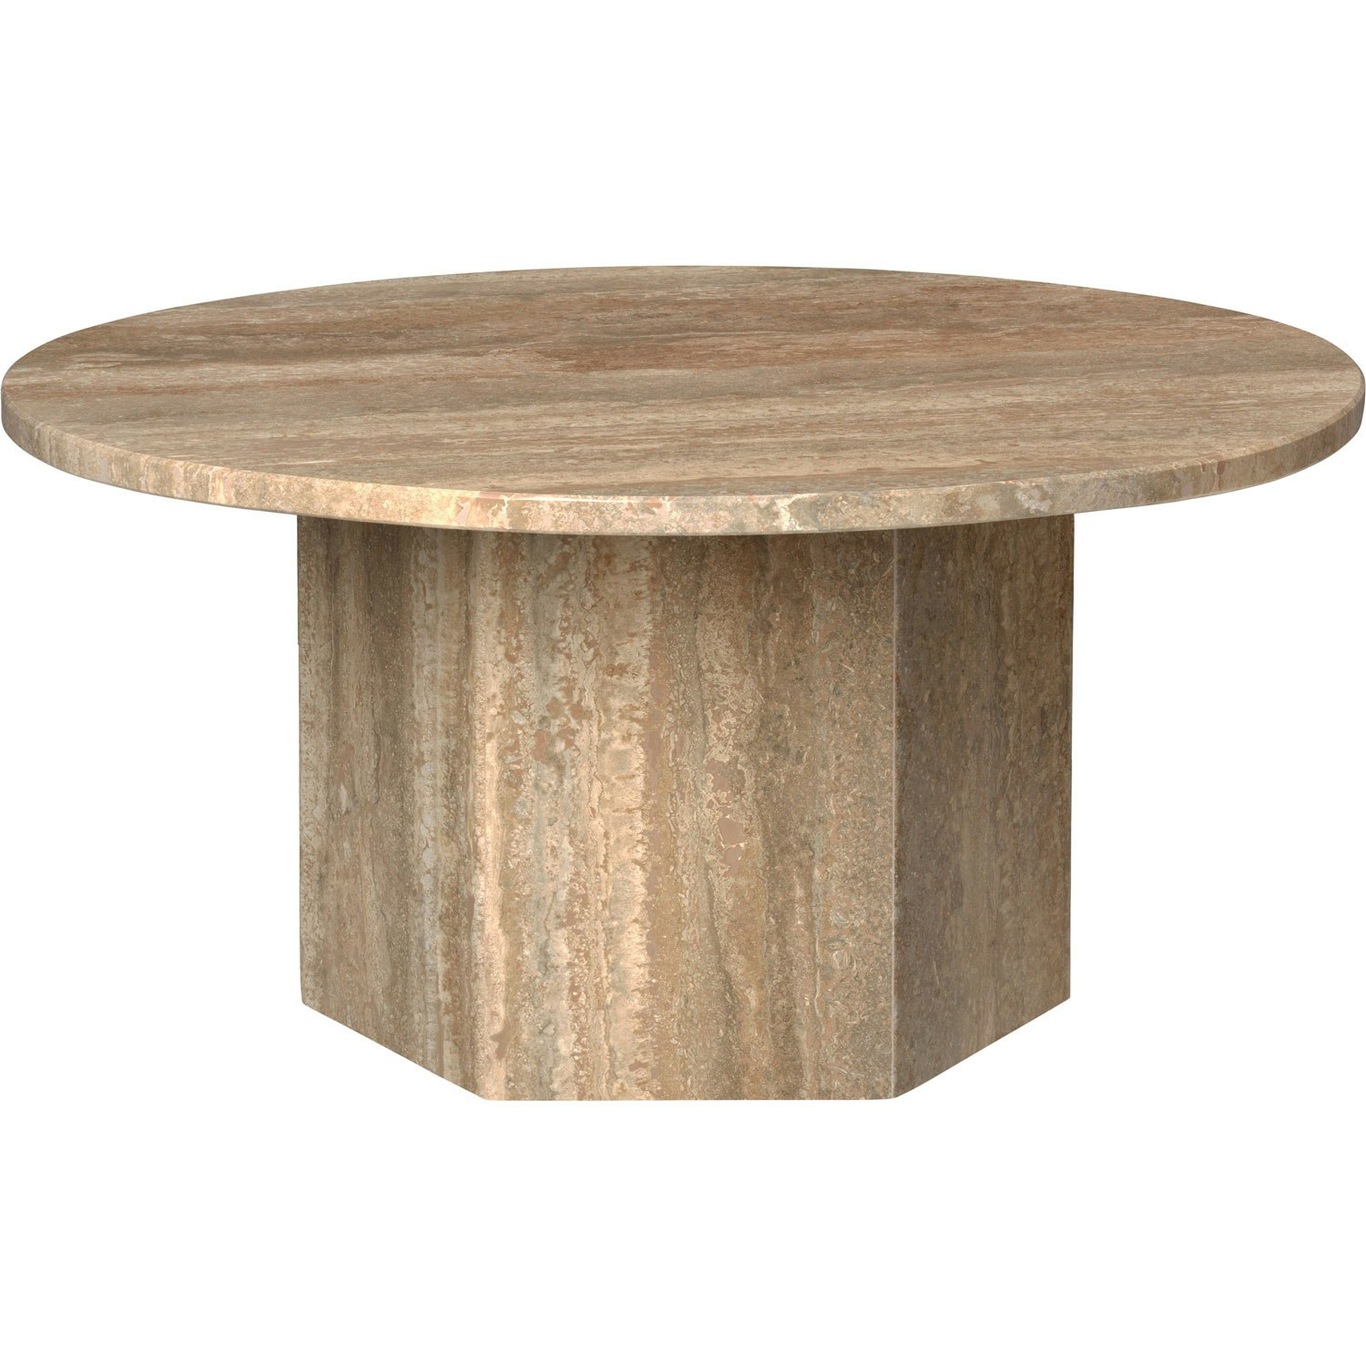 Epic Coffee Table Round 80 cm, Warm Taupe